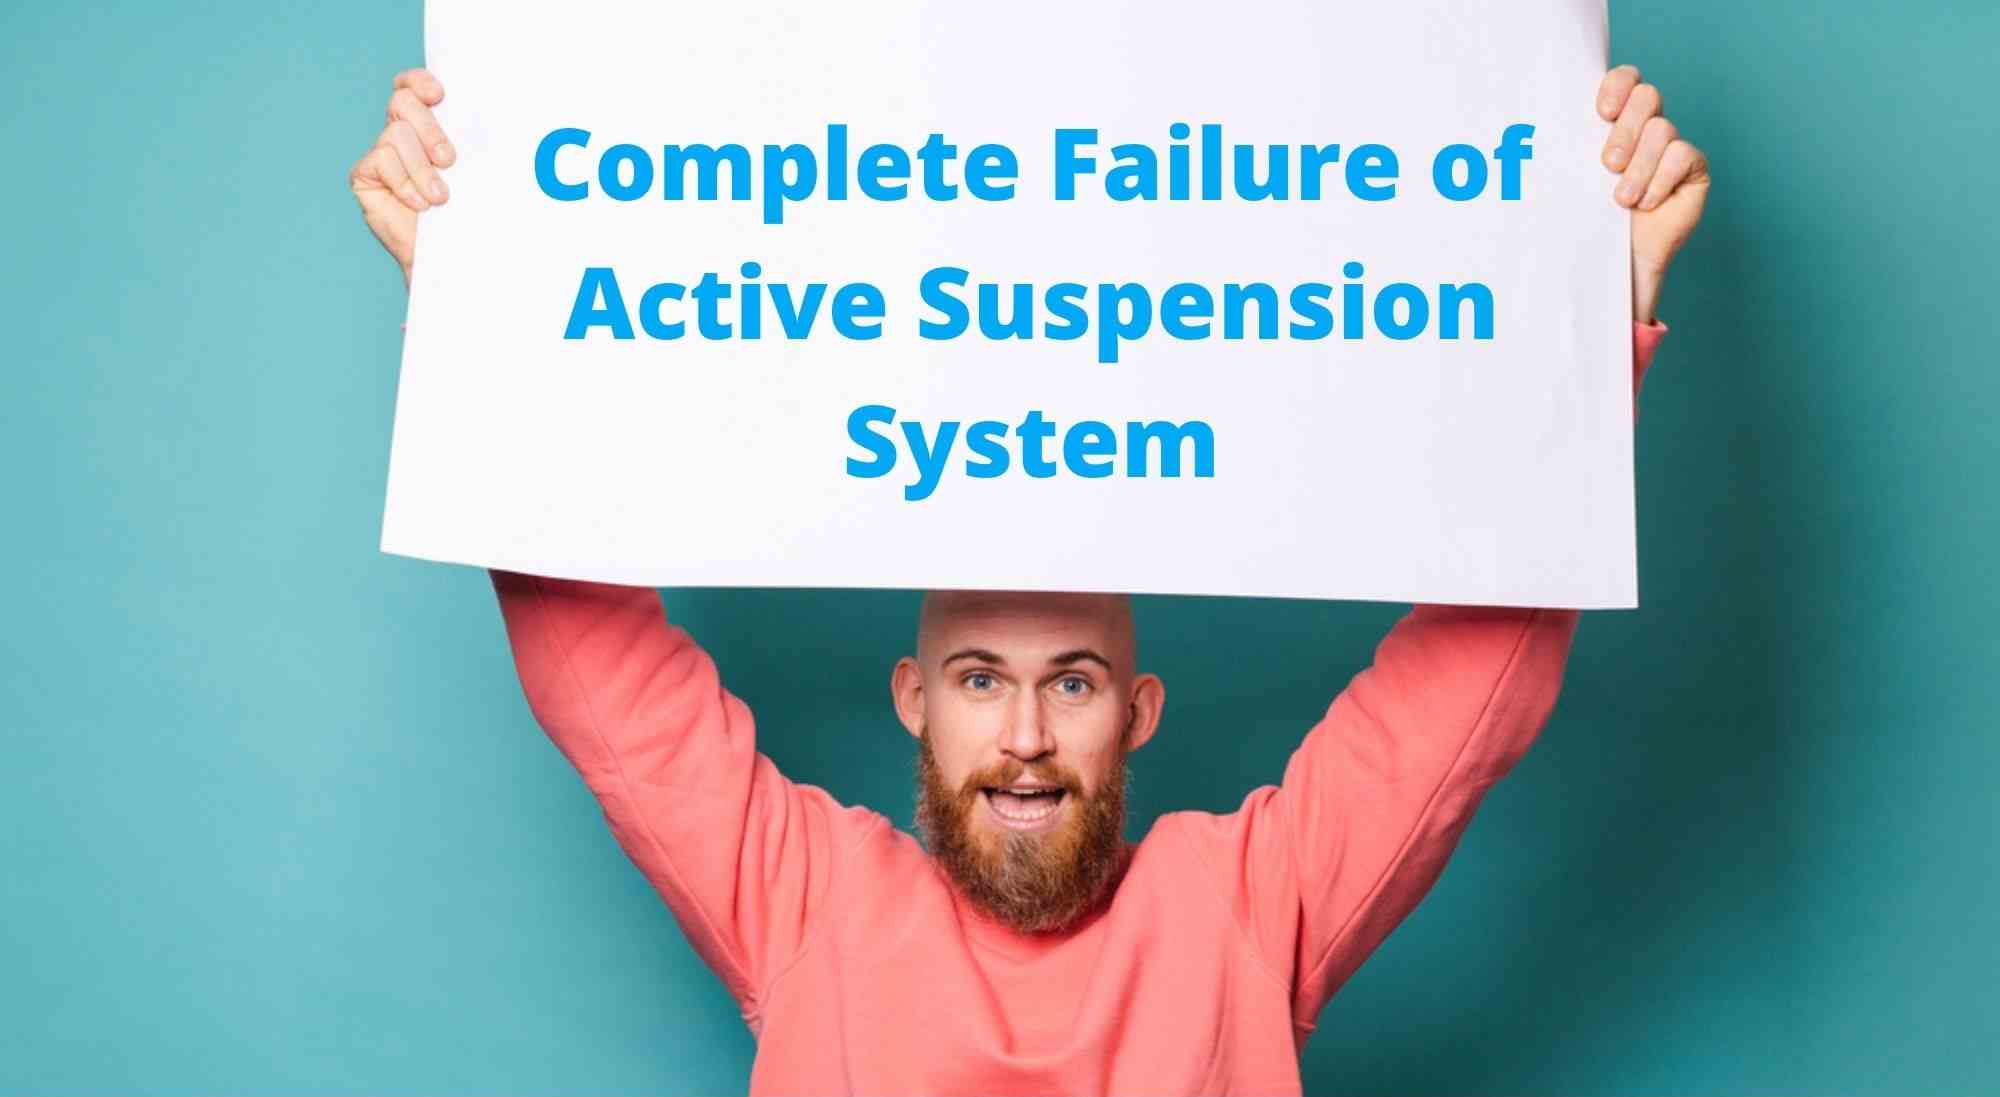 Complete failure of active suspension system